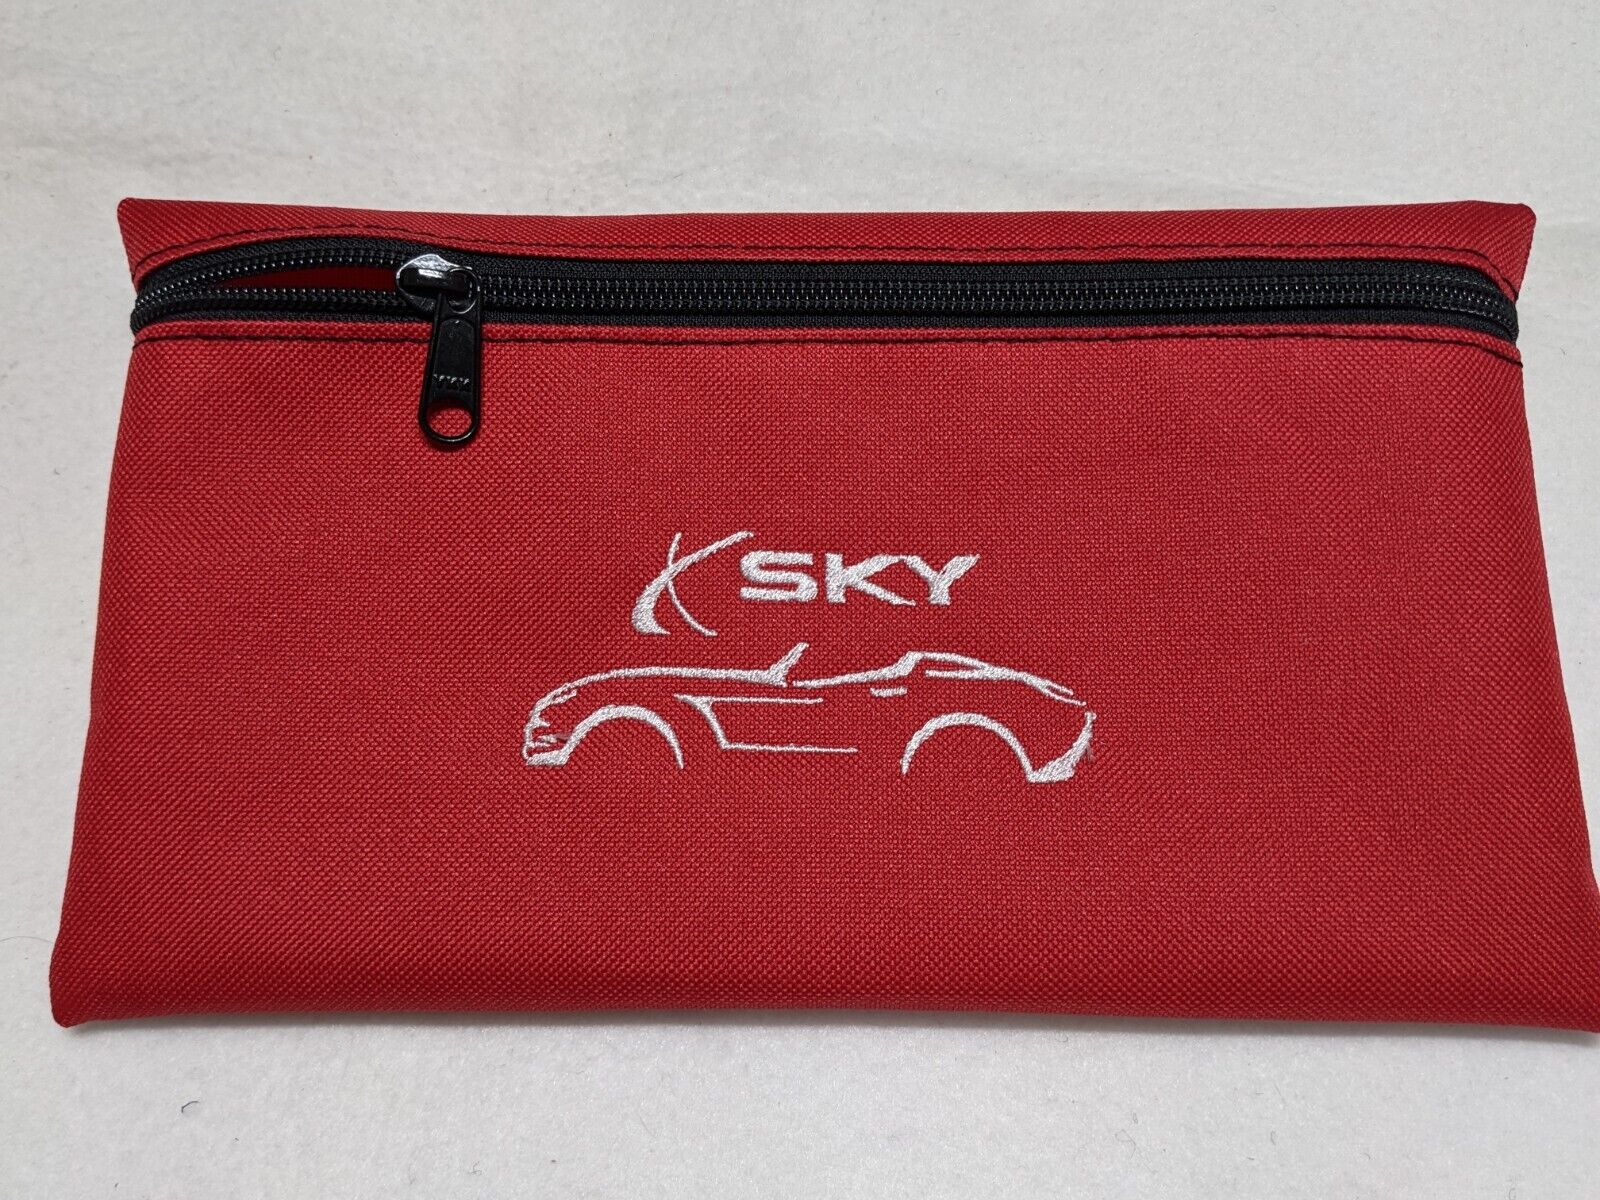 Saturn Sky Kappa Accessory / Map bag / Puck bag / Red w/ Silver Embroidery